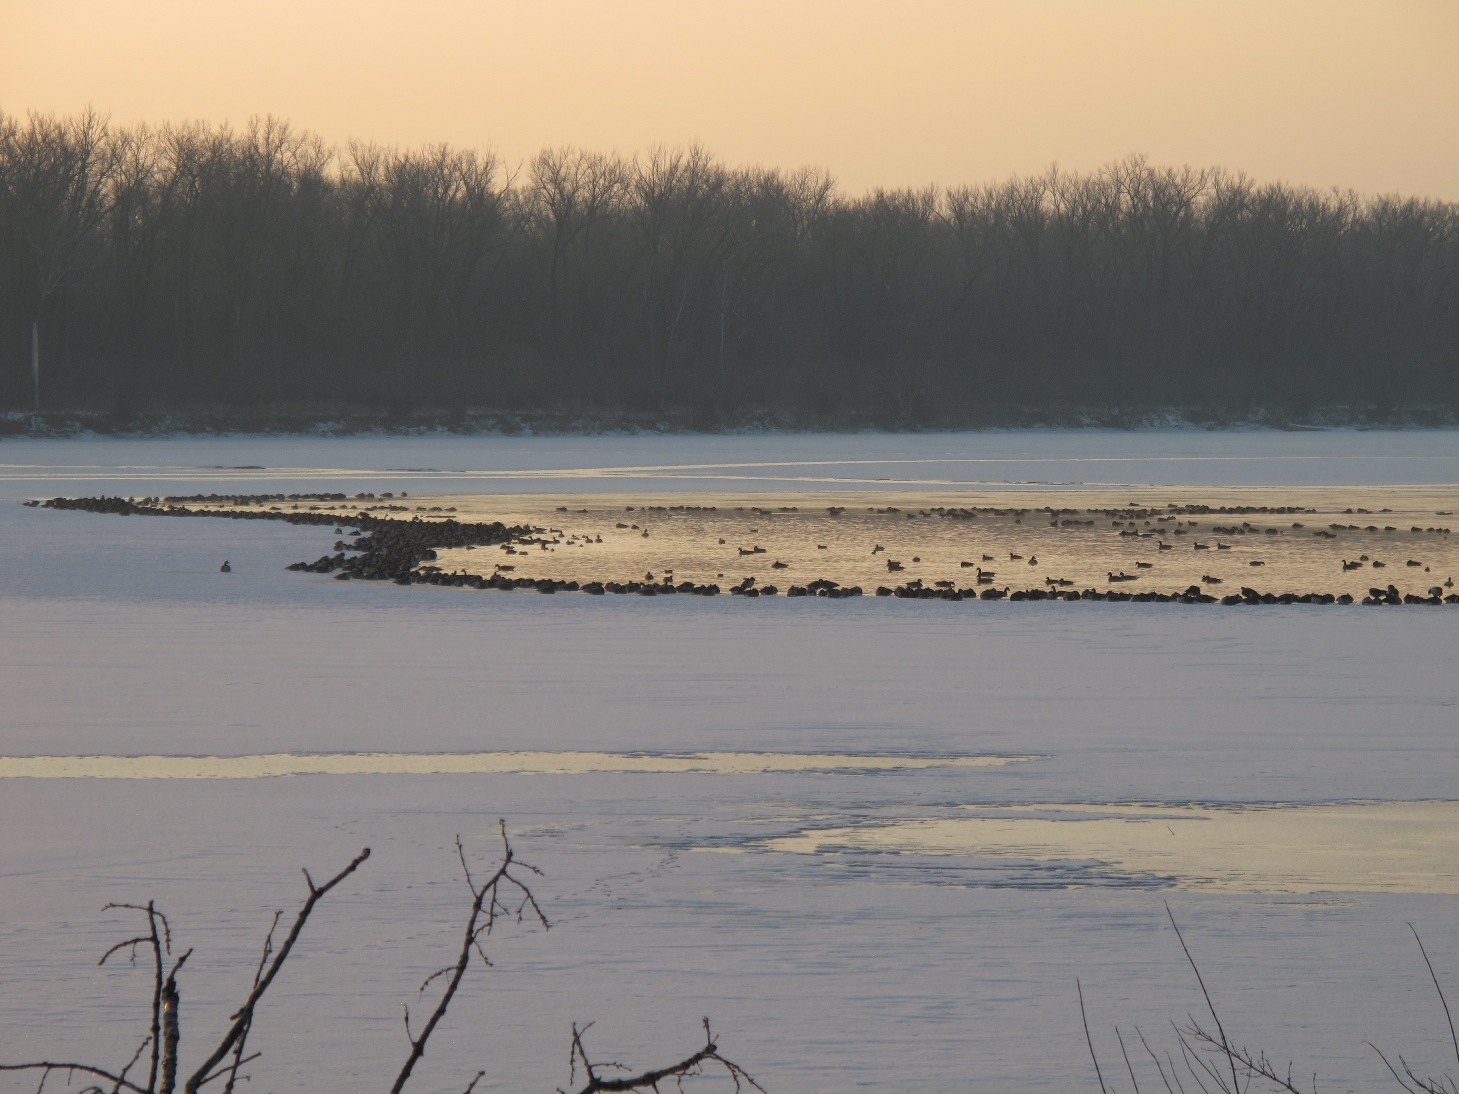 A frozen DeSoto Lake with waterfowl surrounding the open, non-iced area close to the Lewis and Clark trail